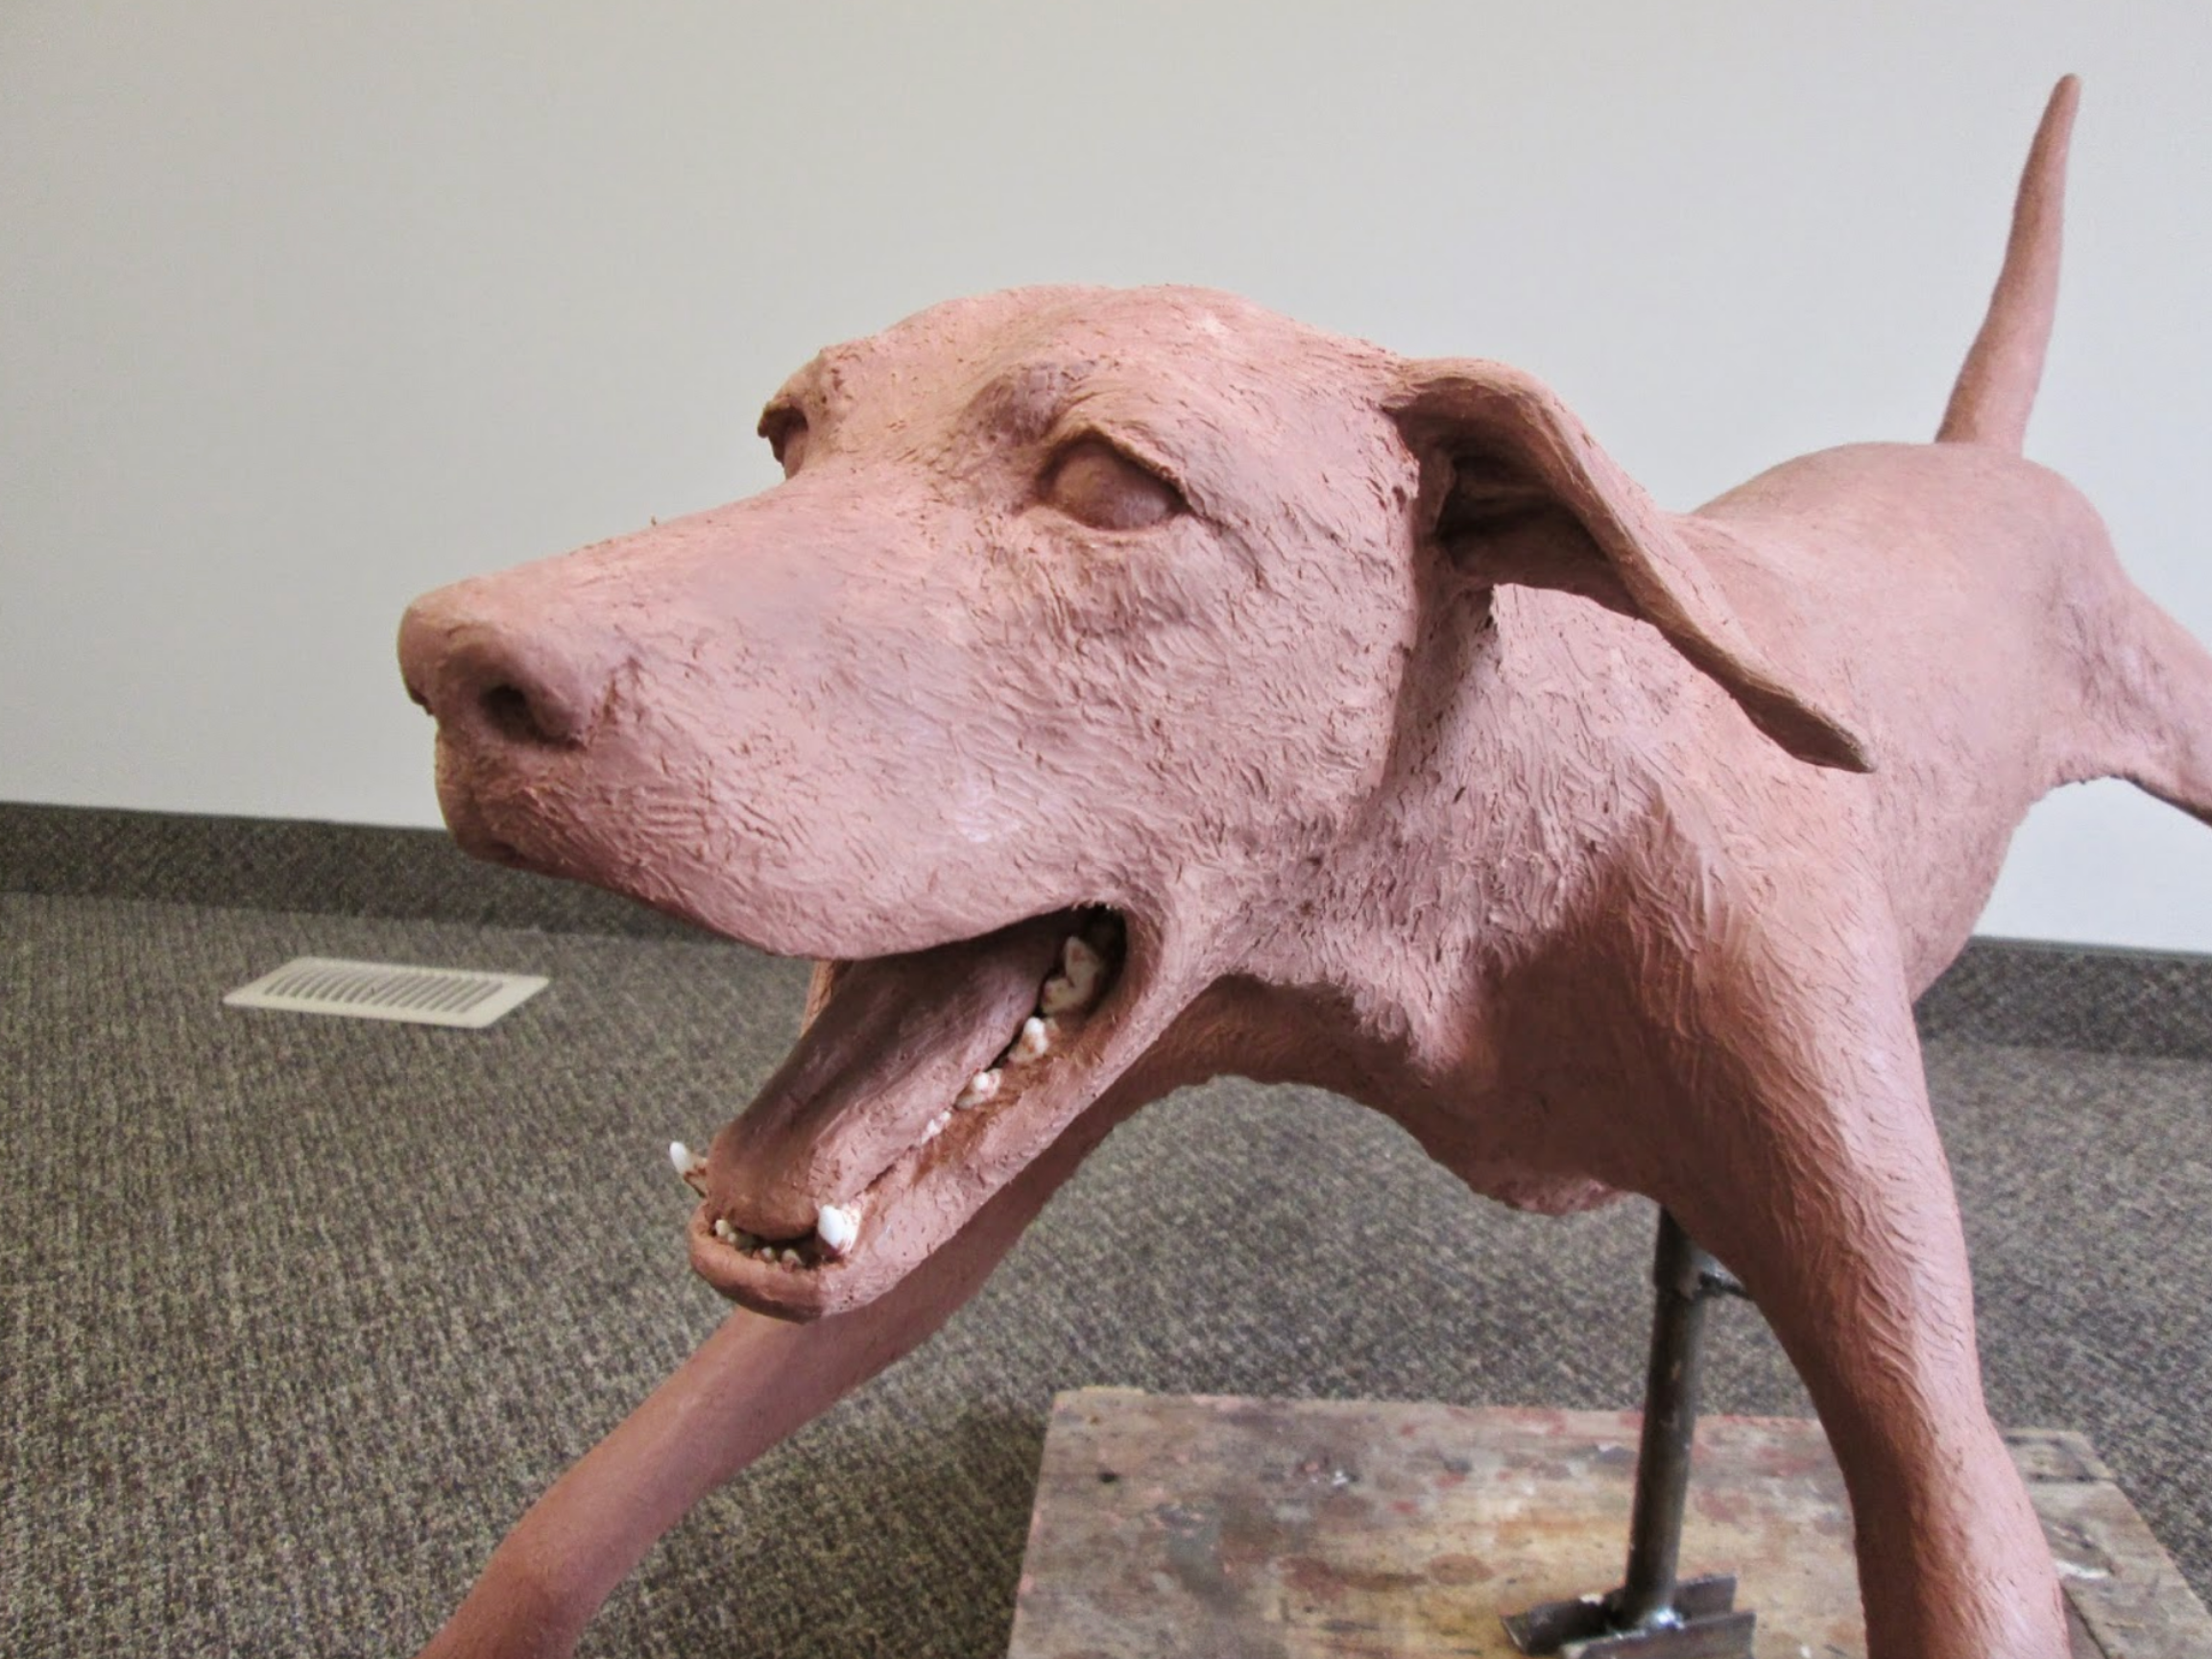  The actual canine skull and lower jaw were incorporated into the sculpture as well once again for accuracy. 